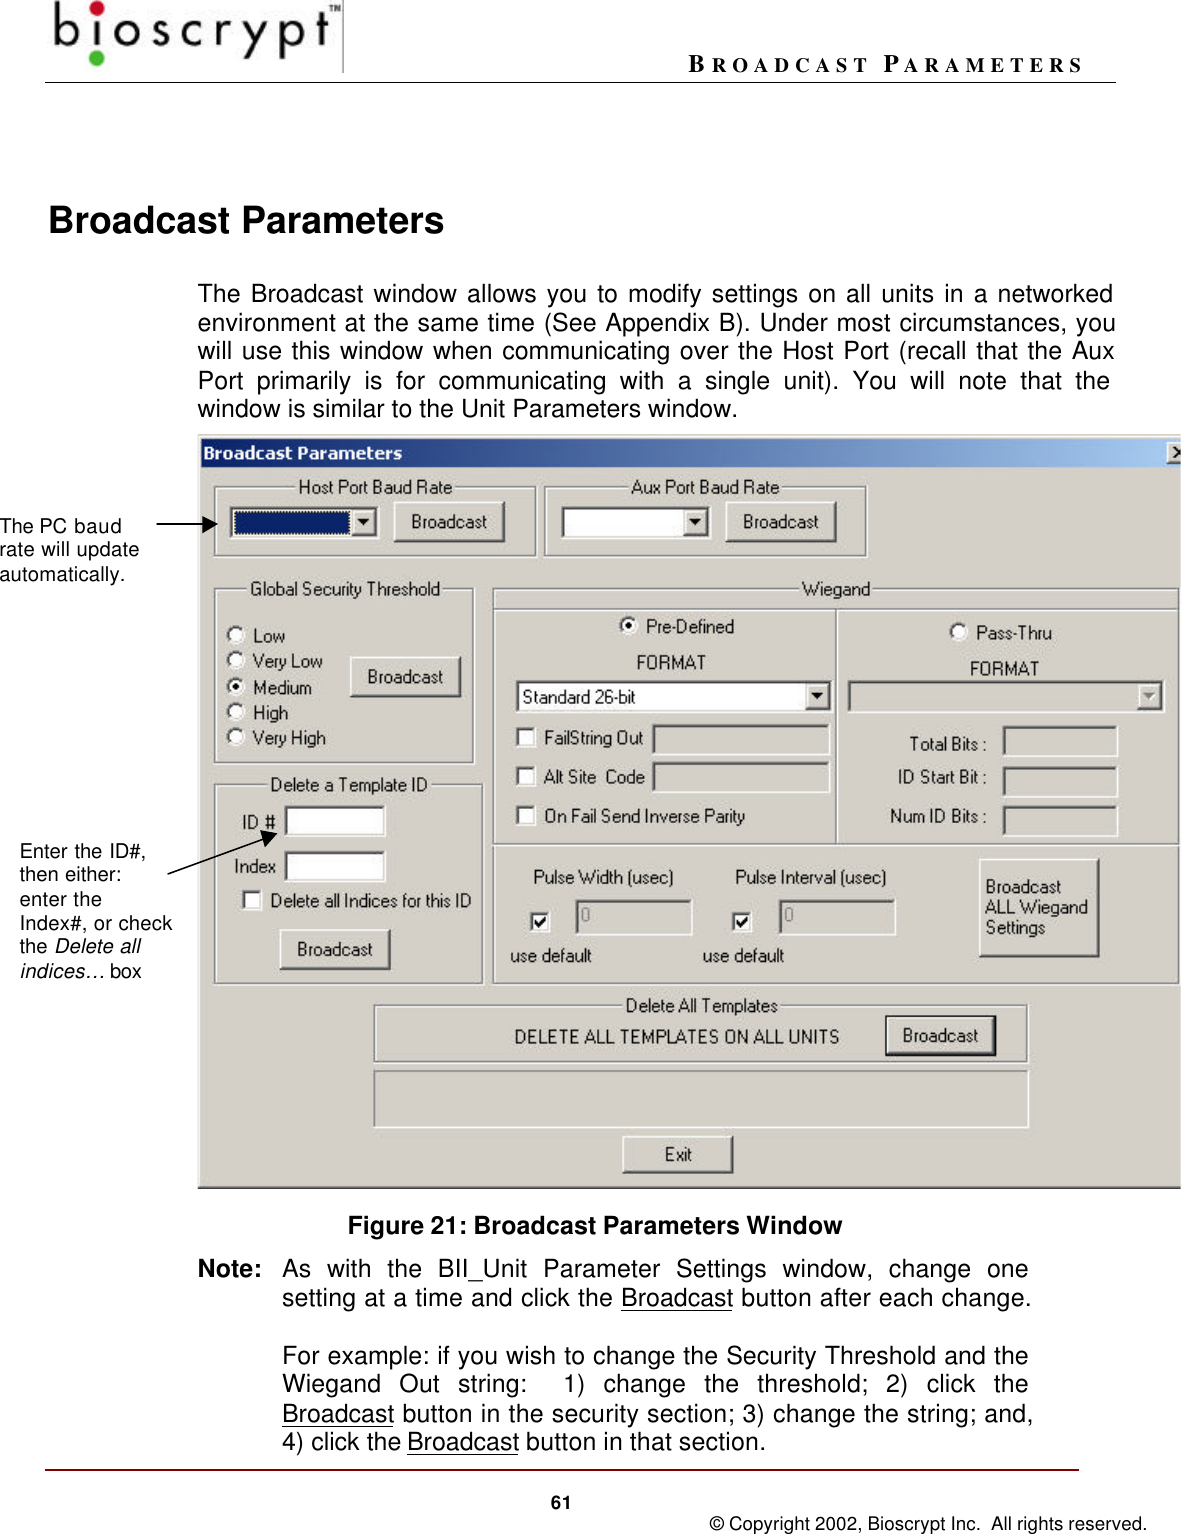 BROADCAST PARAMETERS61 © Copyright 2002, Bioscrypt Inc.  All rights reserved.Broadcast ParametersThe Broadcast window allows you to modify settings on all units in a networkedenvironment at the same time (See Appendix B). Under most circumstances, youwill use this window when communicating over the Host Port (recall that the AuxPort primarily is for communicating with a single unit). You will note that thewindow is similar to the Unit Parameters window.    Figure 21: Broadcast Parameters WindowNote: As with the BII_Unit Parameter Settings window, change onesetting at a time and click the Broadcast button after each change.For example: if you wish to change the Security Threshold and theWiegand Out string:  1) change the threshold; 2) click theBroadcast button in the security section; 3) change the string; and,4) click the Broadcast button in that section.The PC baudrate will updateautomatically.Enter the ID#,then either:enter theIndex#, or checkthe Delete allindices… box